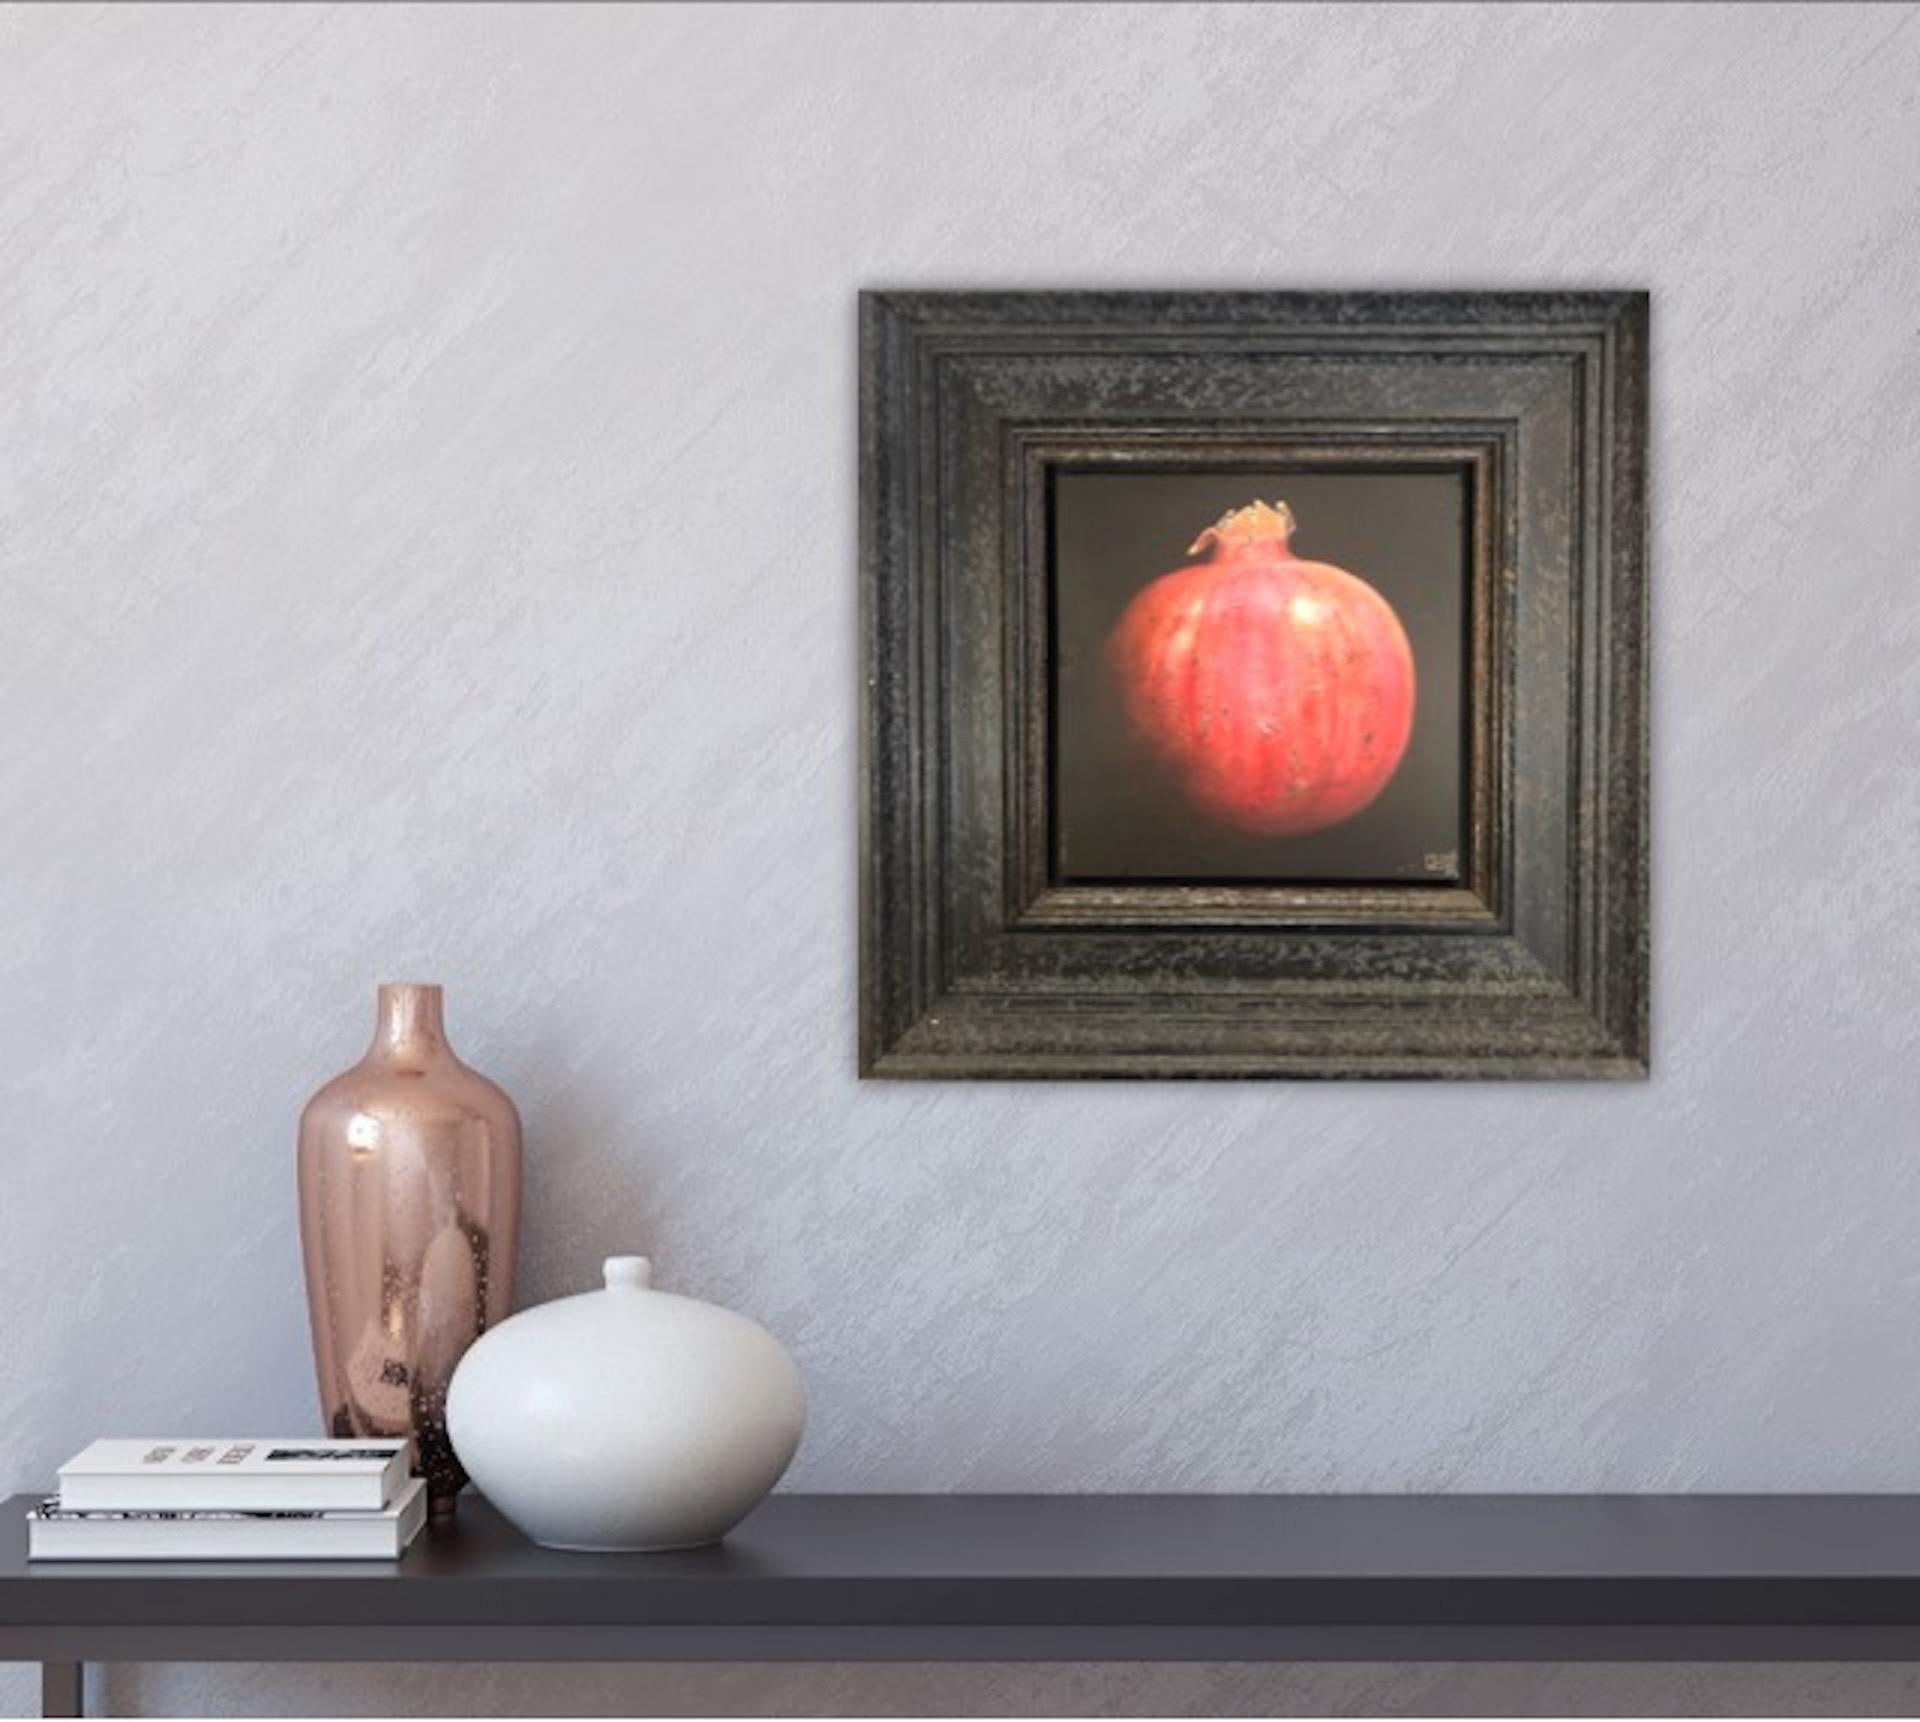 Dani Humberstone
Stripy Red Pomegranate
Original Oil Painting
Oil Paint on Canvas
Image Size: H 19cm x W 19cm x 1cm
Framed Size: H 35cm x W 35cm x D 5cm
Sold Framed

Pomegranate is an original oil painting by Dani Humberstone. The layered black